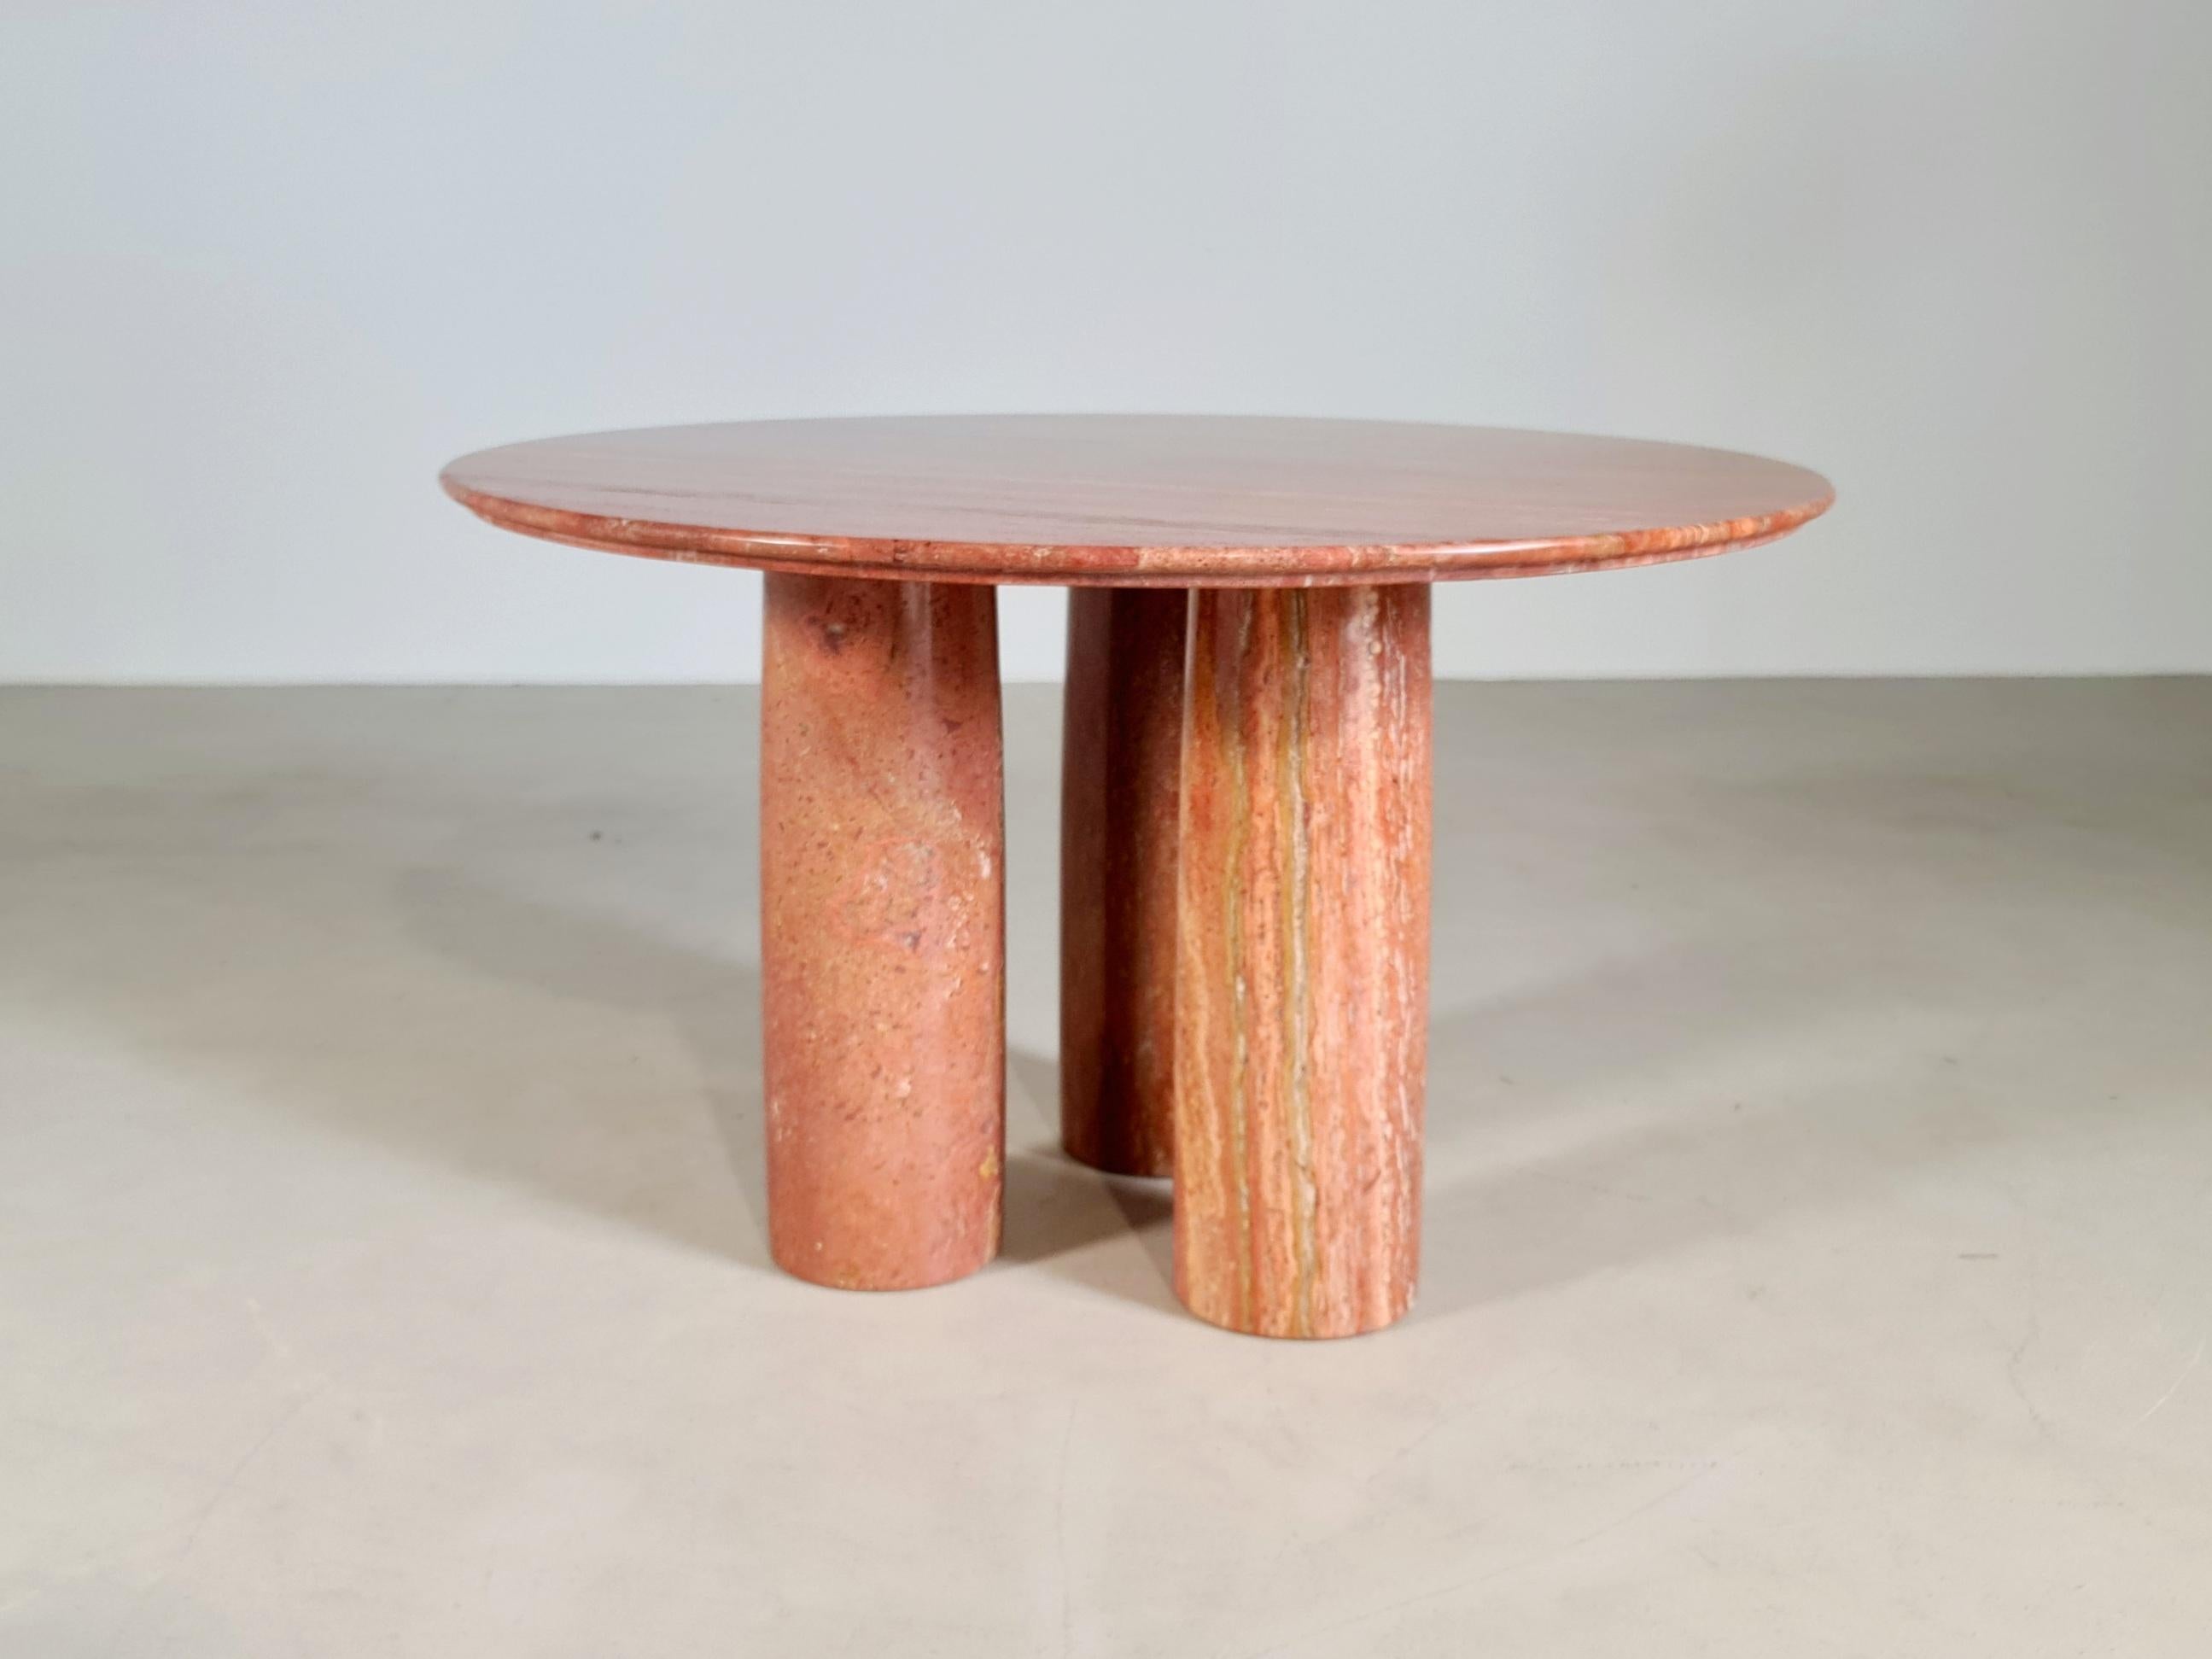 This stunning minimalist table designed by Milanese architect Mario Bellini, is made purely from one material, solid red tufo marble. A round top on three cylindrical columns. This exact version is a very rare thing to come across as it was produced